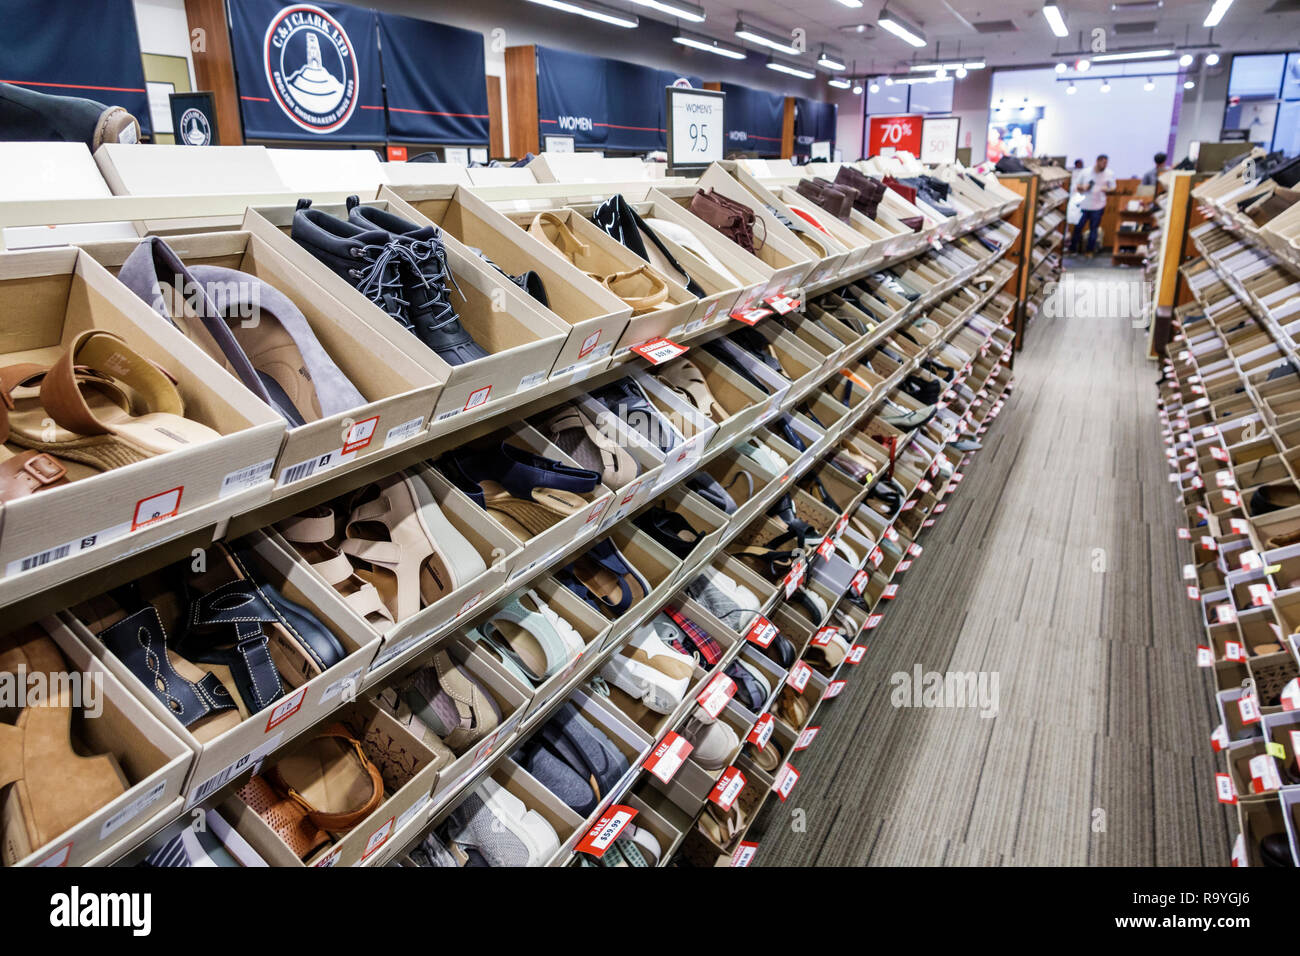 clarks bostonian outlet usa